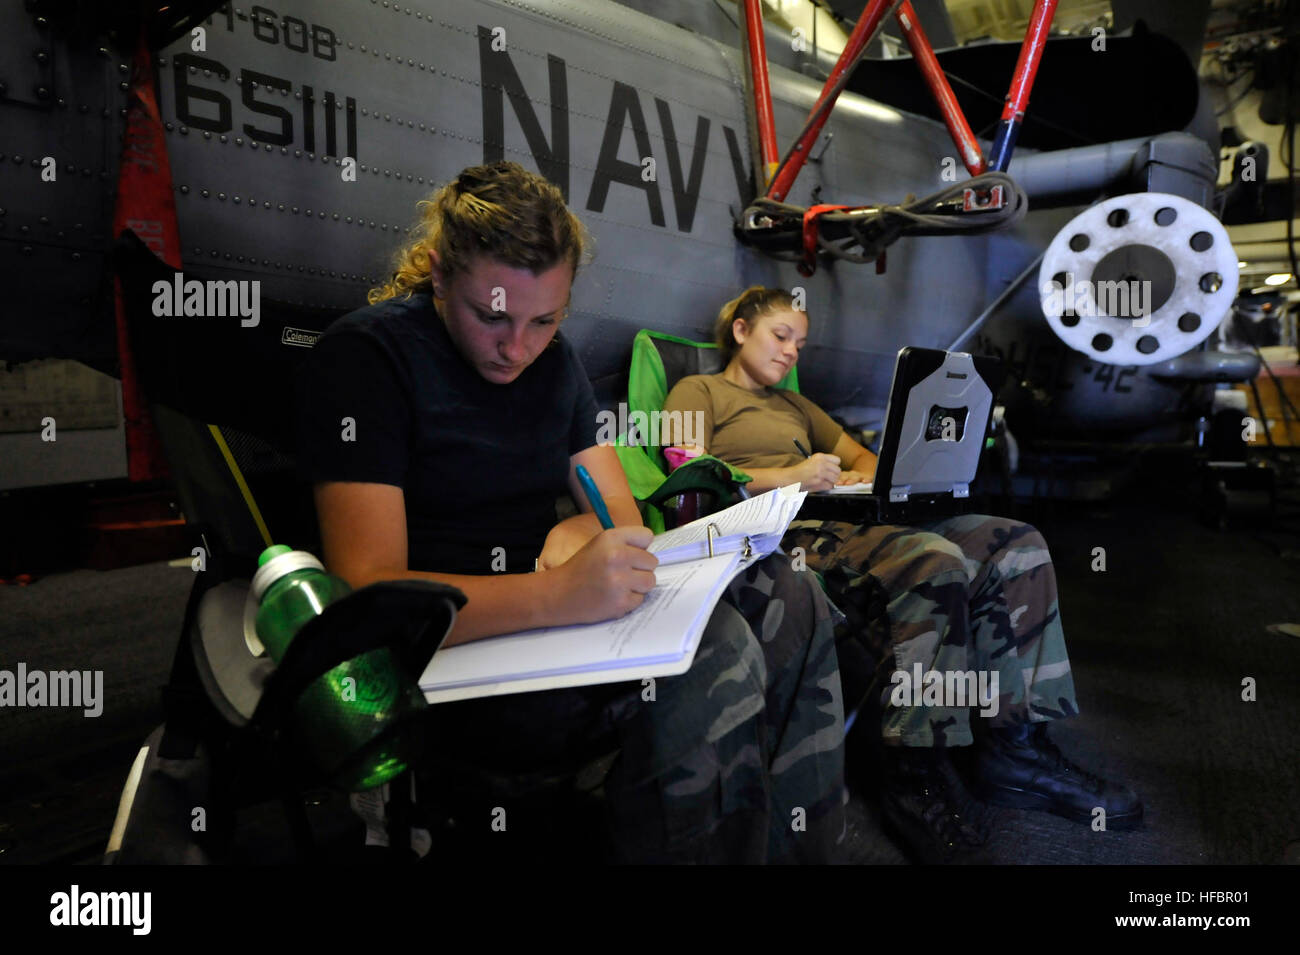 MEDITERRANEAN SEA (Sept. 19, 2012) Aviation Structural Mechanic 3rd Class Kalee McCulloch, left, works on her enlisted surface warfare specialist qualification as Aviation Machinist’s Mate Airman Kenzie Lane studies for her advancement exam in the starboard helicopter hangar aboard the guided-missile destroyer USS Jason Dunham (DDG 109). Jason Dunham is on a scheduled deployment in support of maritime security operations and theater security cooperation efforts in the 6th Fleet area of responsibility. (U.S. Navy photo by Mass Communication Specialist 2nd Class Deven B. King/Released) 120919-N- Stock Photo